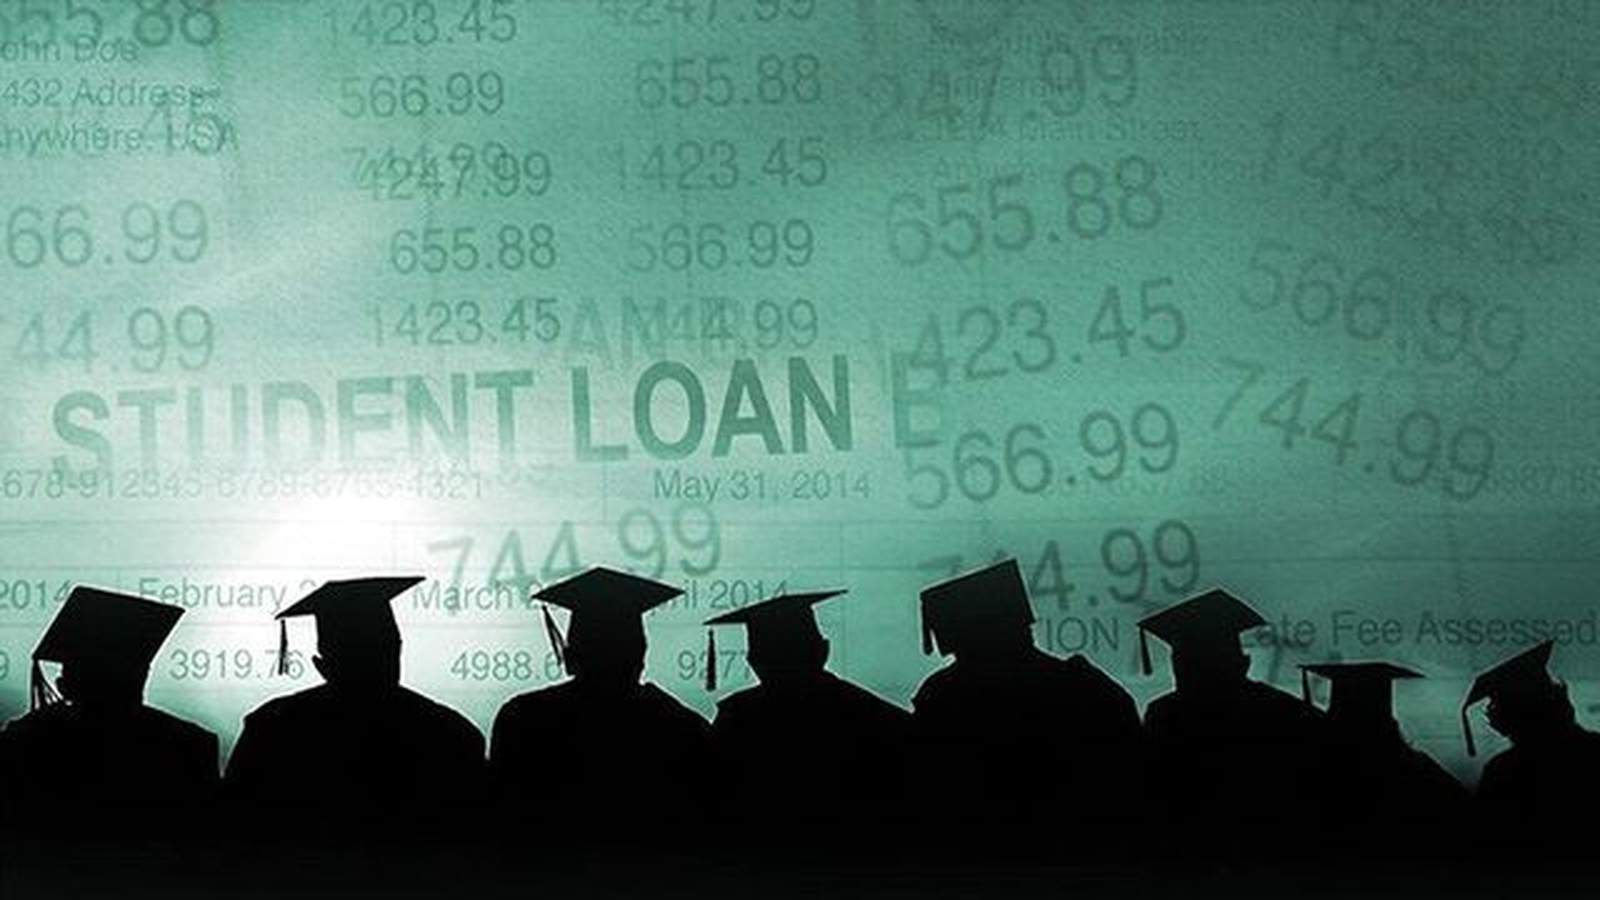 New tax incentive will allow companies to help pay off employees’ student loan debt